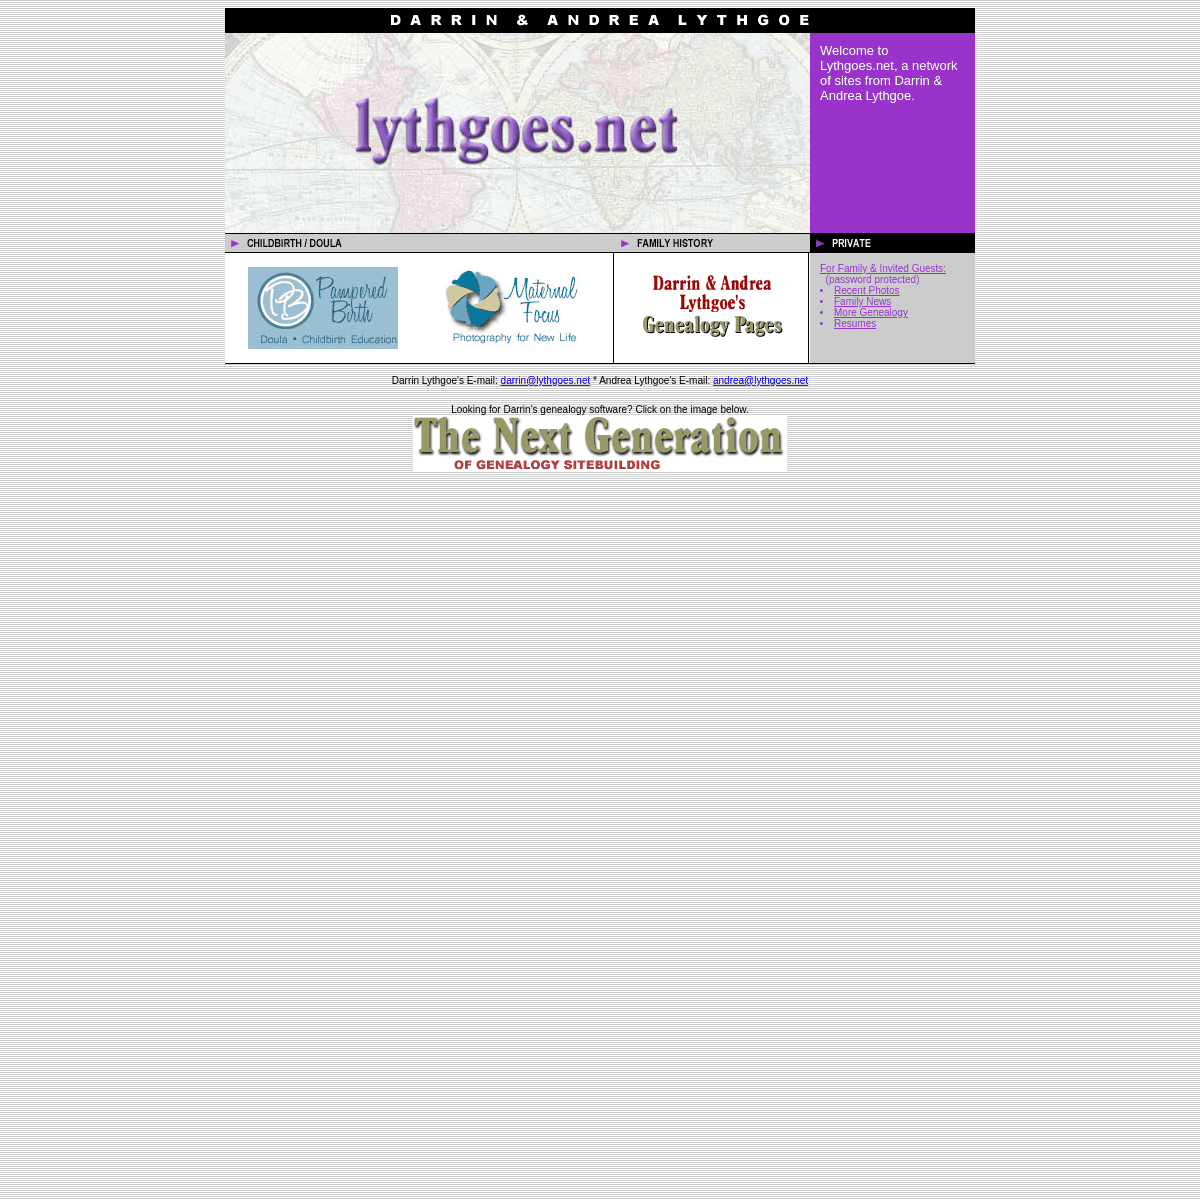 A complete backup of lythgoes.net